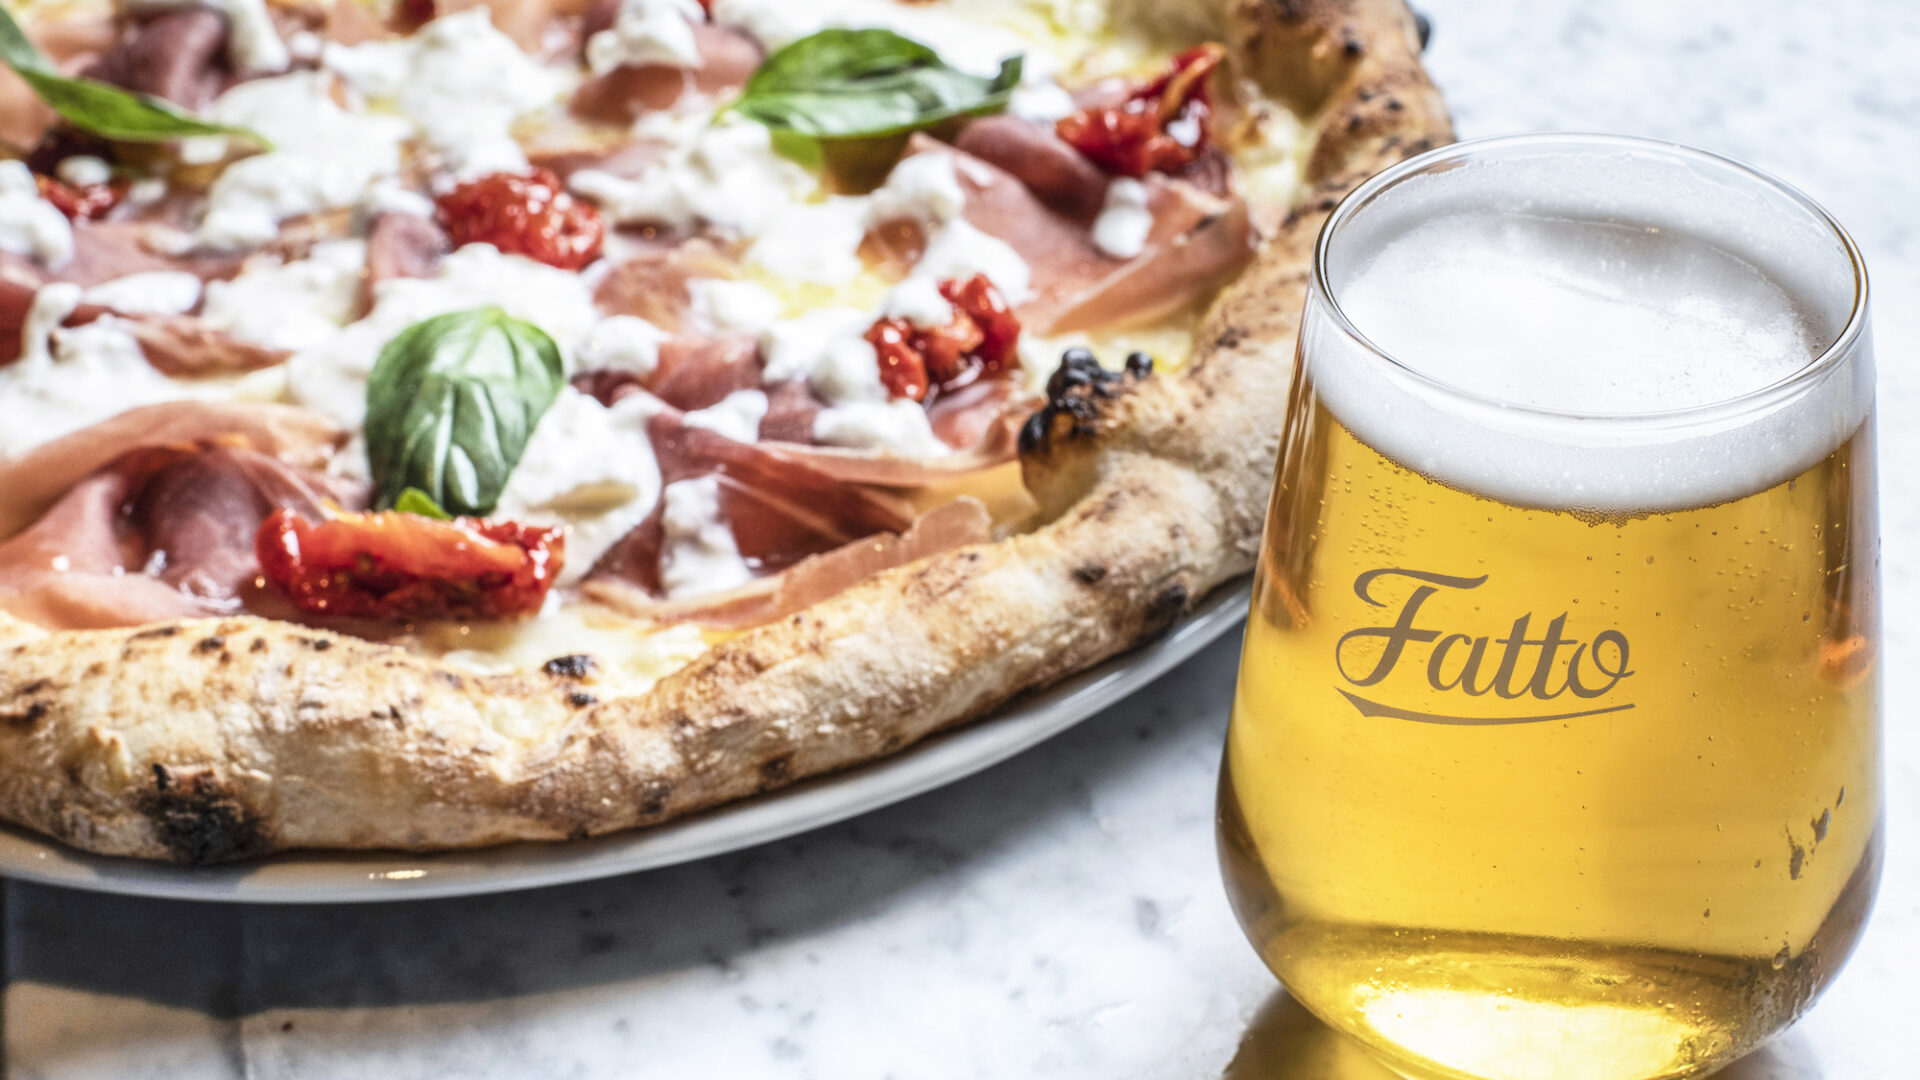 Fatto Pizza & Beer, Pancras Square, King's Cross